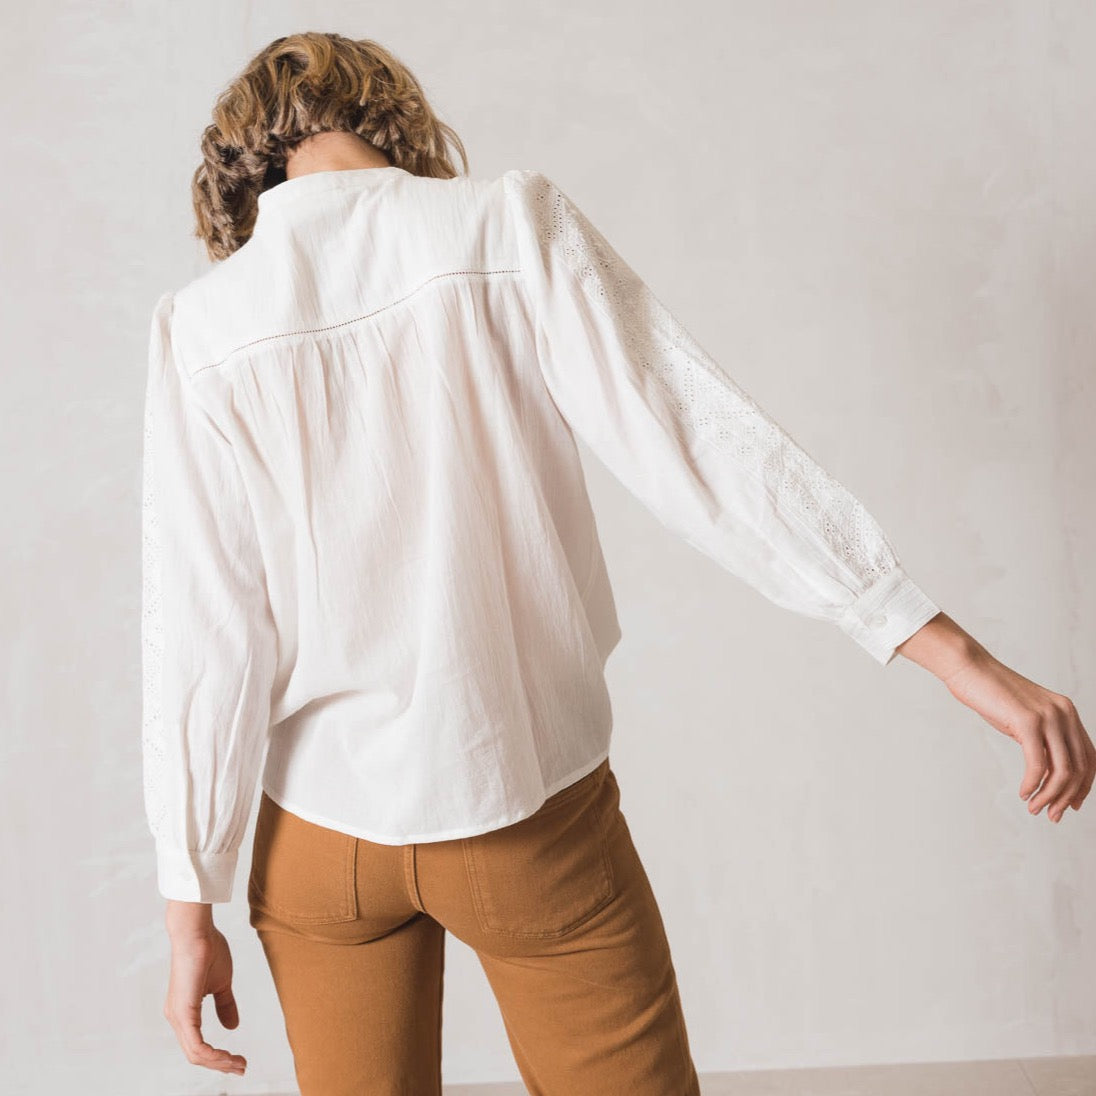 Indi and Cold ::  Camisa Embroidery Anglaise Yolk and Sleeve  (140)